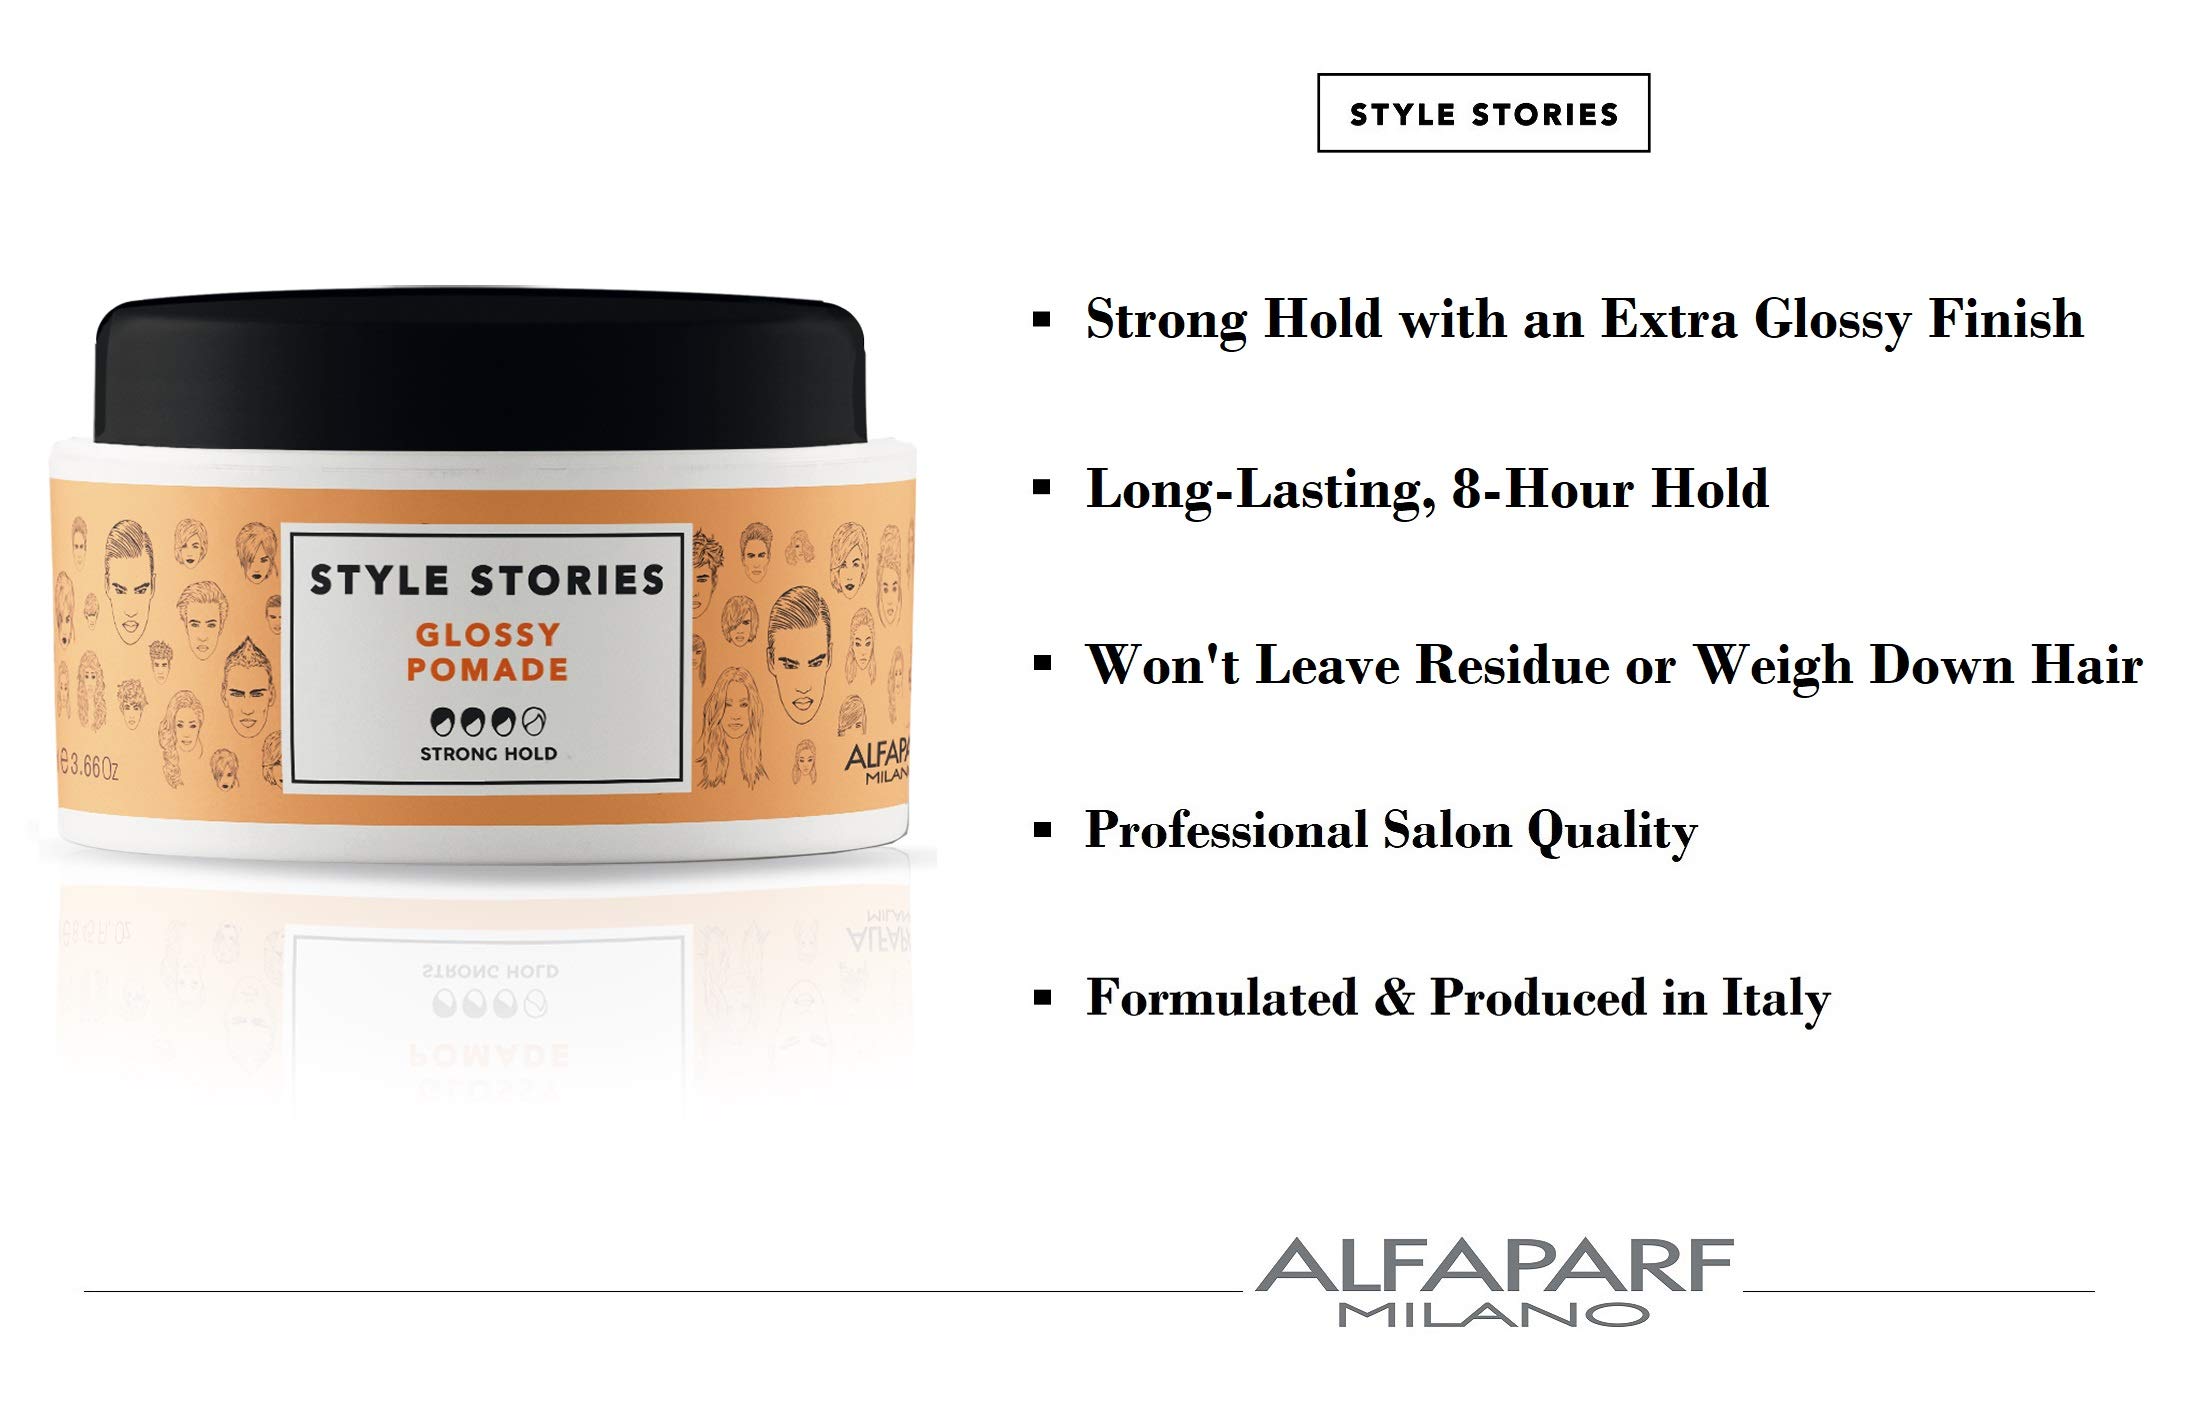 Alfaparf Milano Style Stories Glossy Pomade - Strong Hold - Extra Shiny Finish Wax Pomade - Long Lasting, All Day Hold - Professional Salon Quality Hair Styling Product - 3.66 oz.